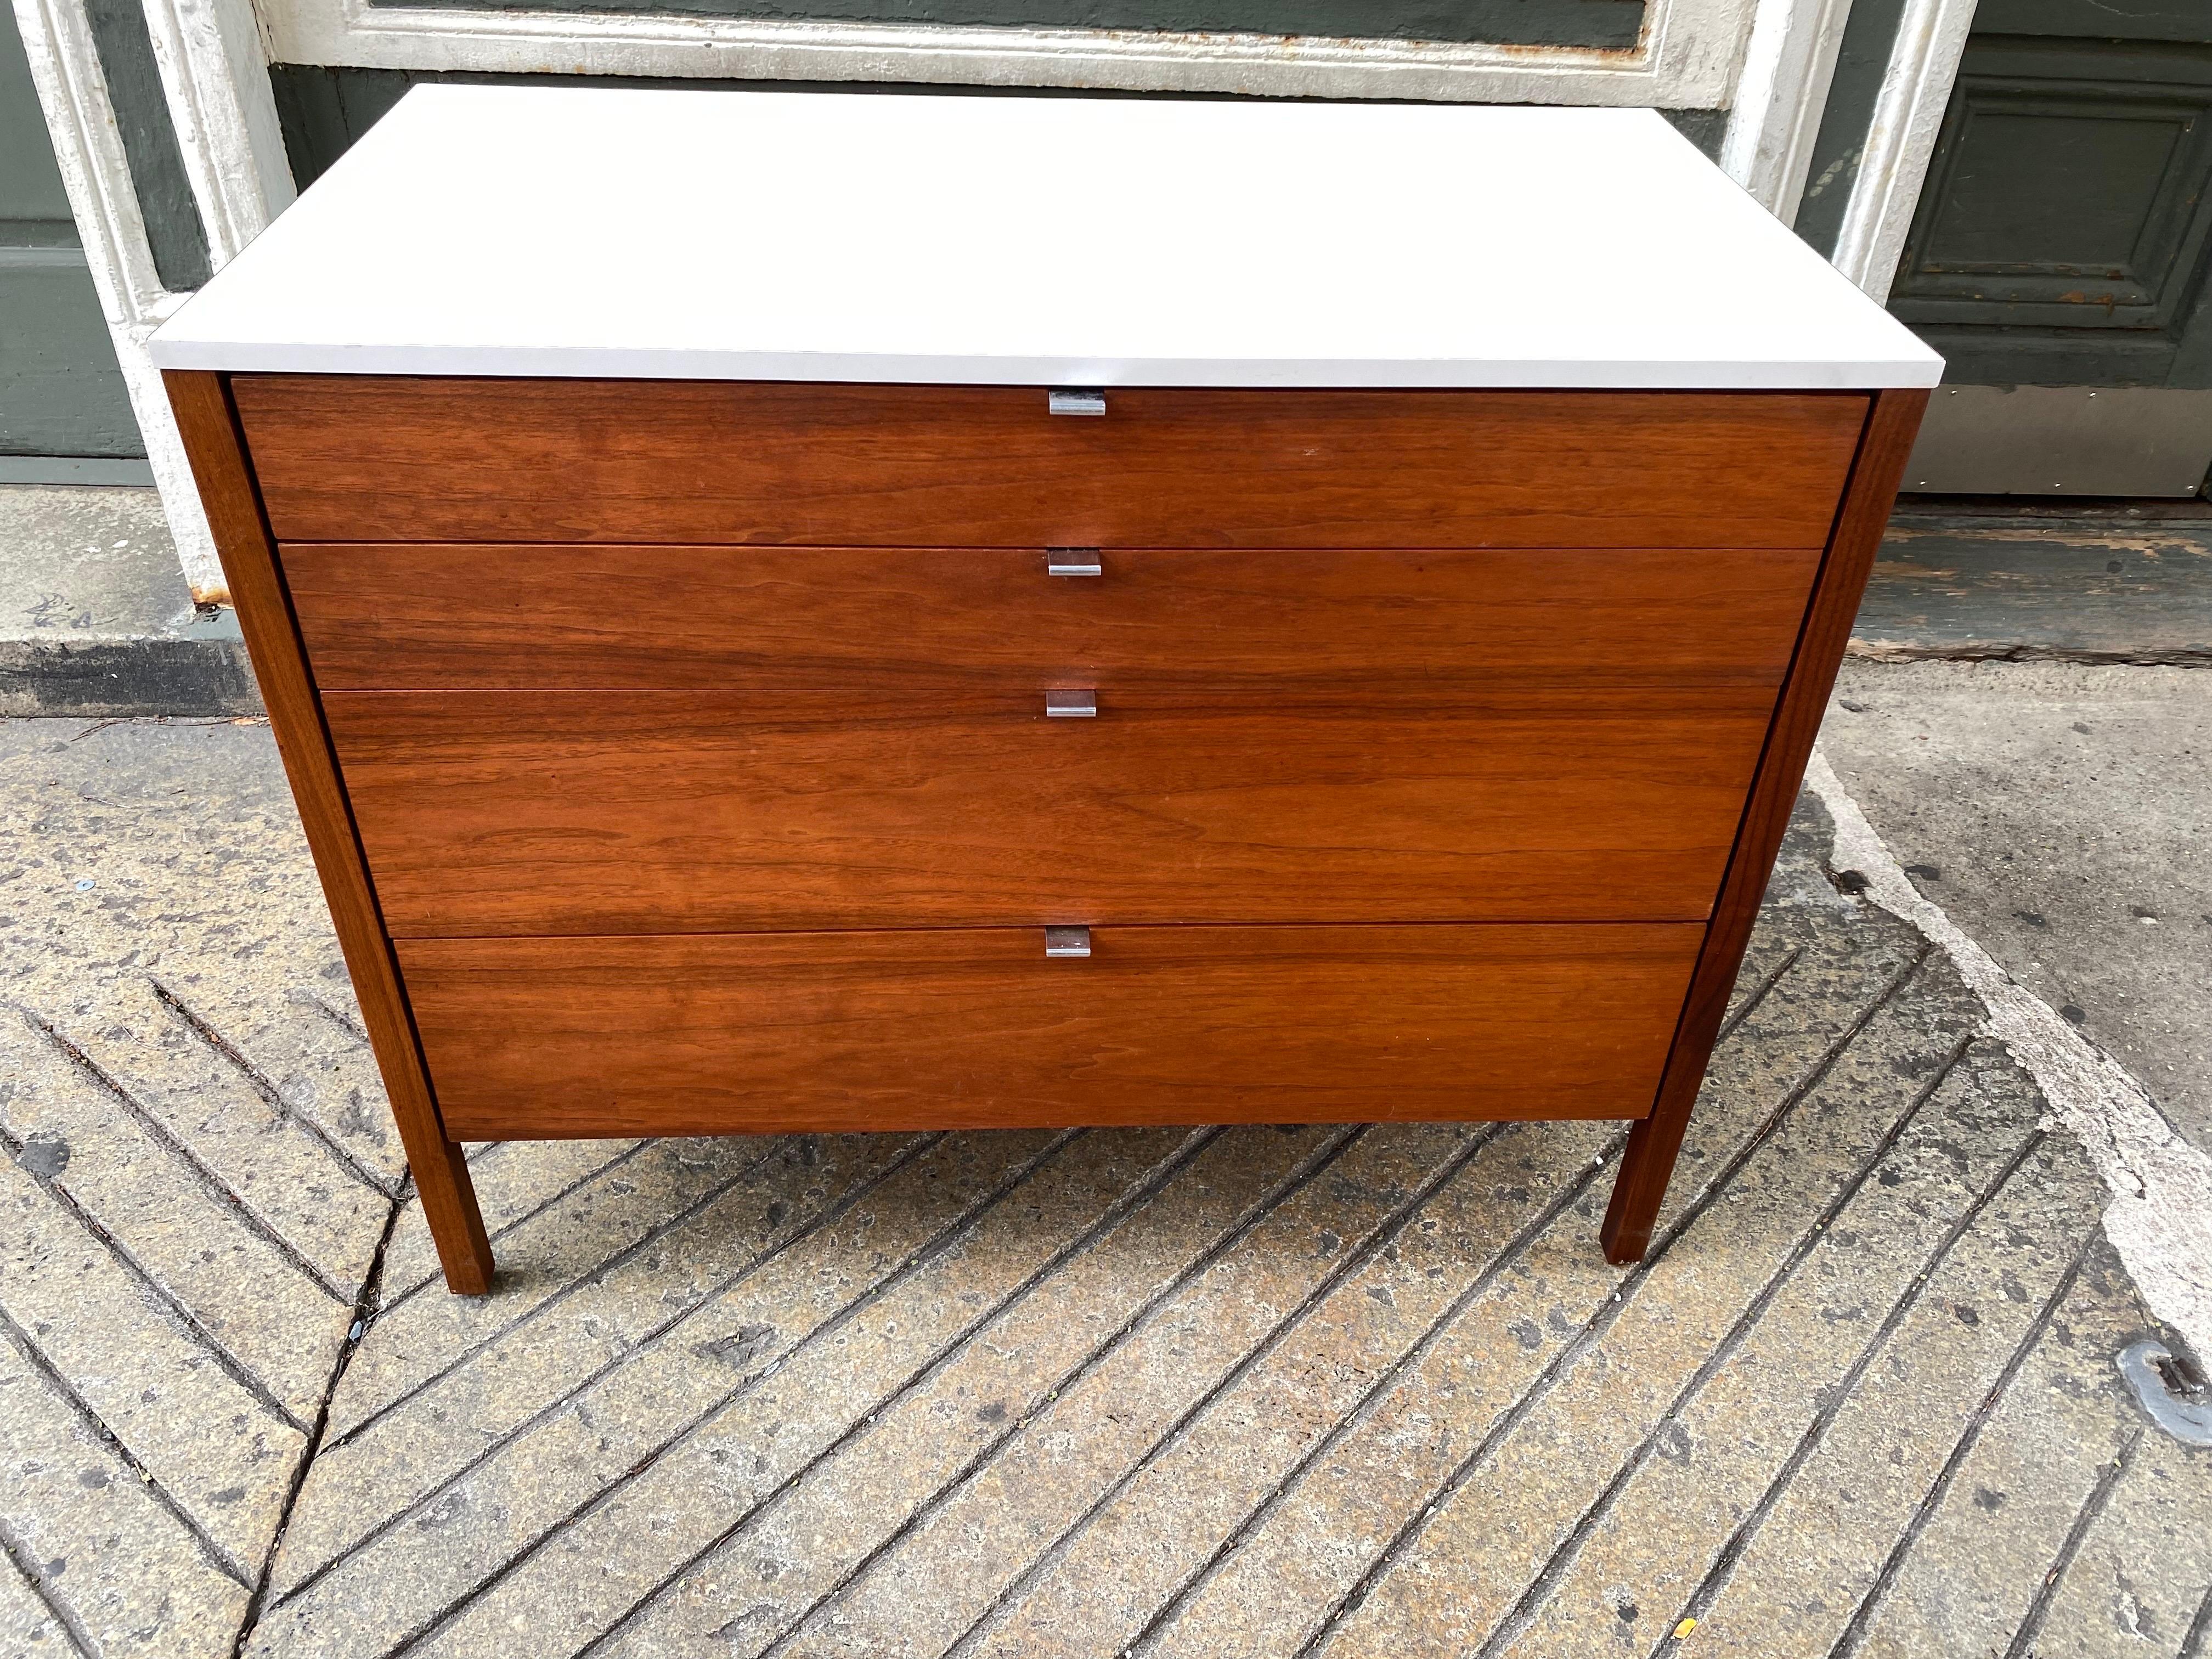 Florence Knoll for Knoll walnut dresser with white formica tops. All original condition! 4 walnut drawers with chrome center flat handles. Clean simple design blends in anywhere! Matching nightstands available in separate listing! Two Dressers